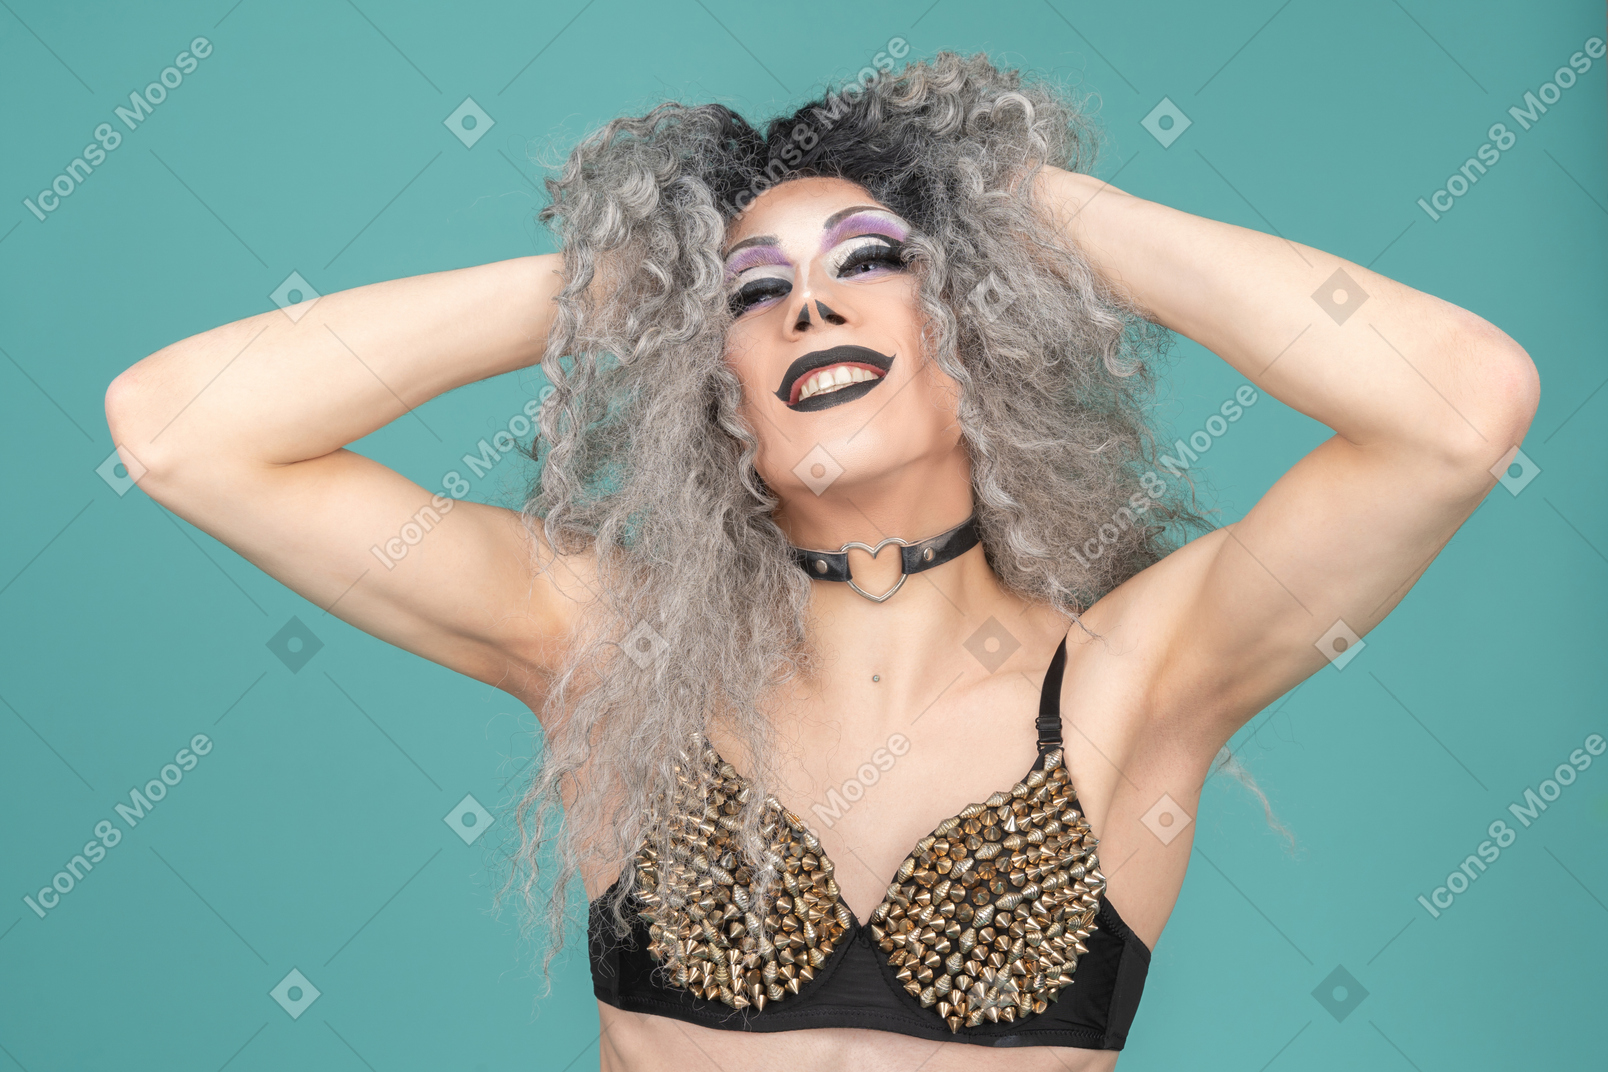 Drag queen in studded bra smiling with hands in their hair